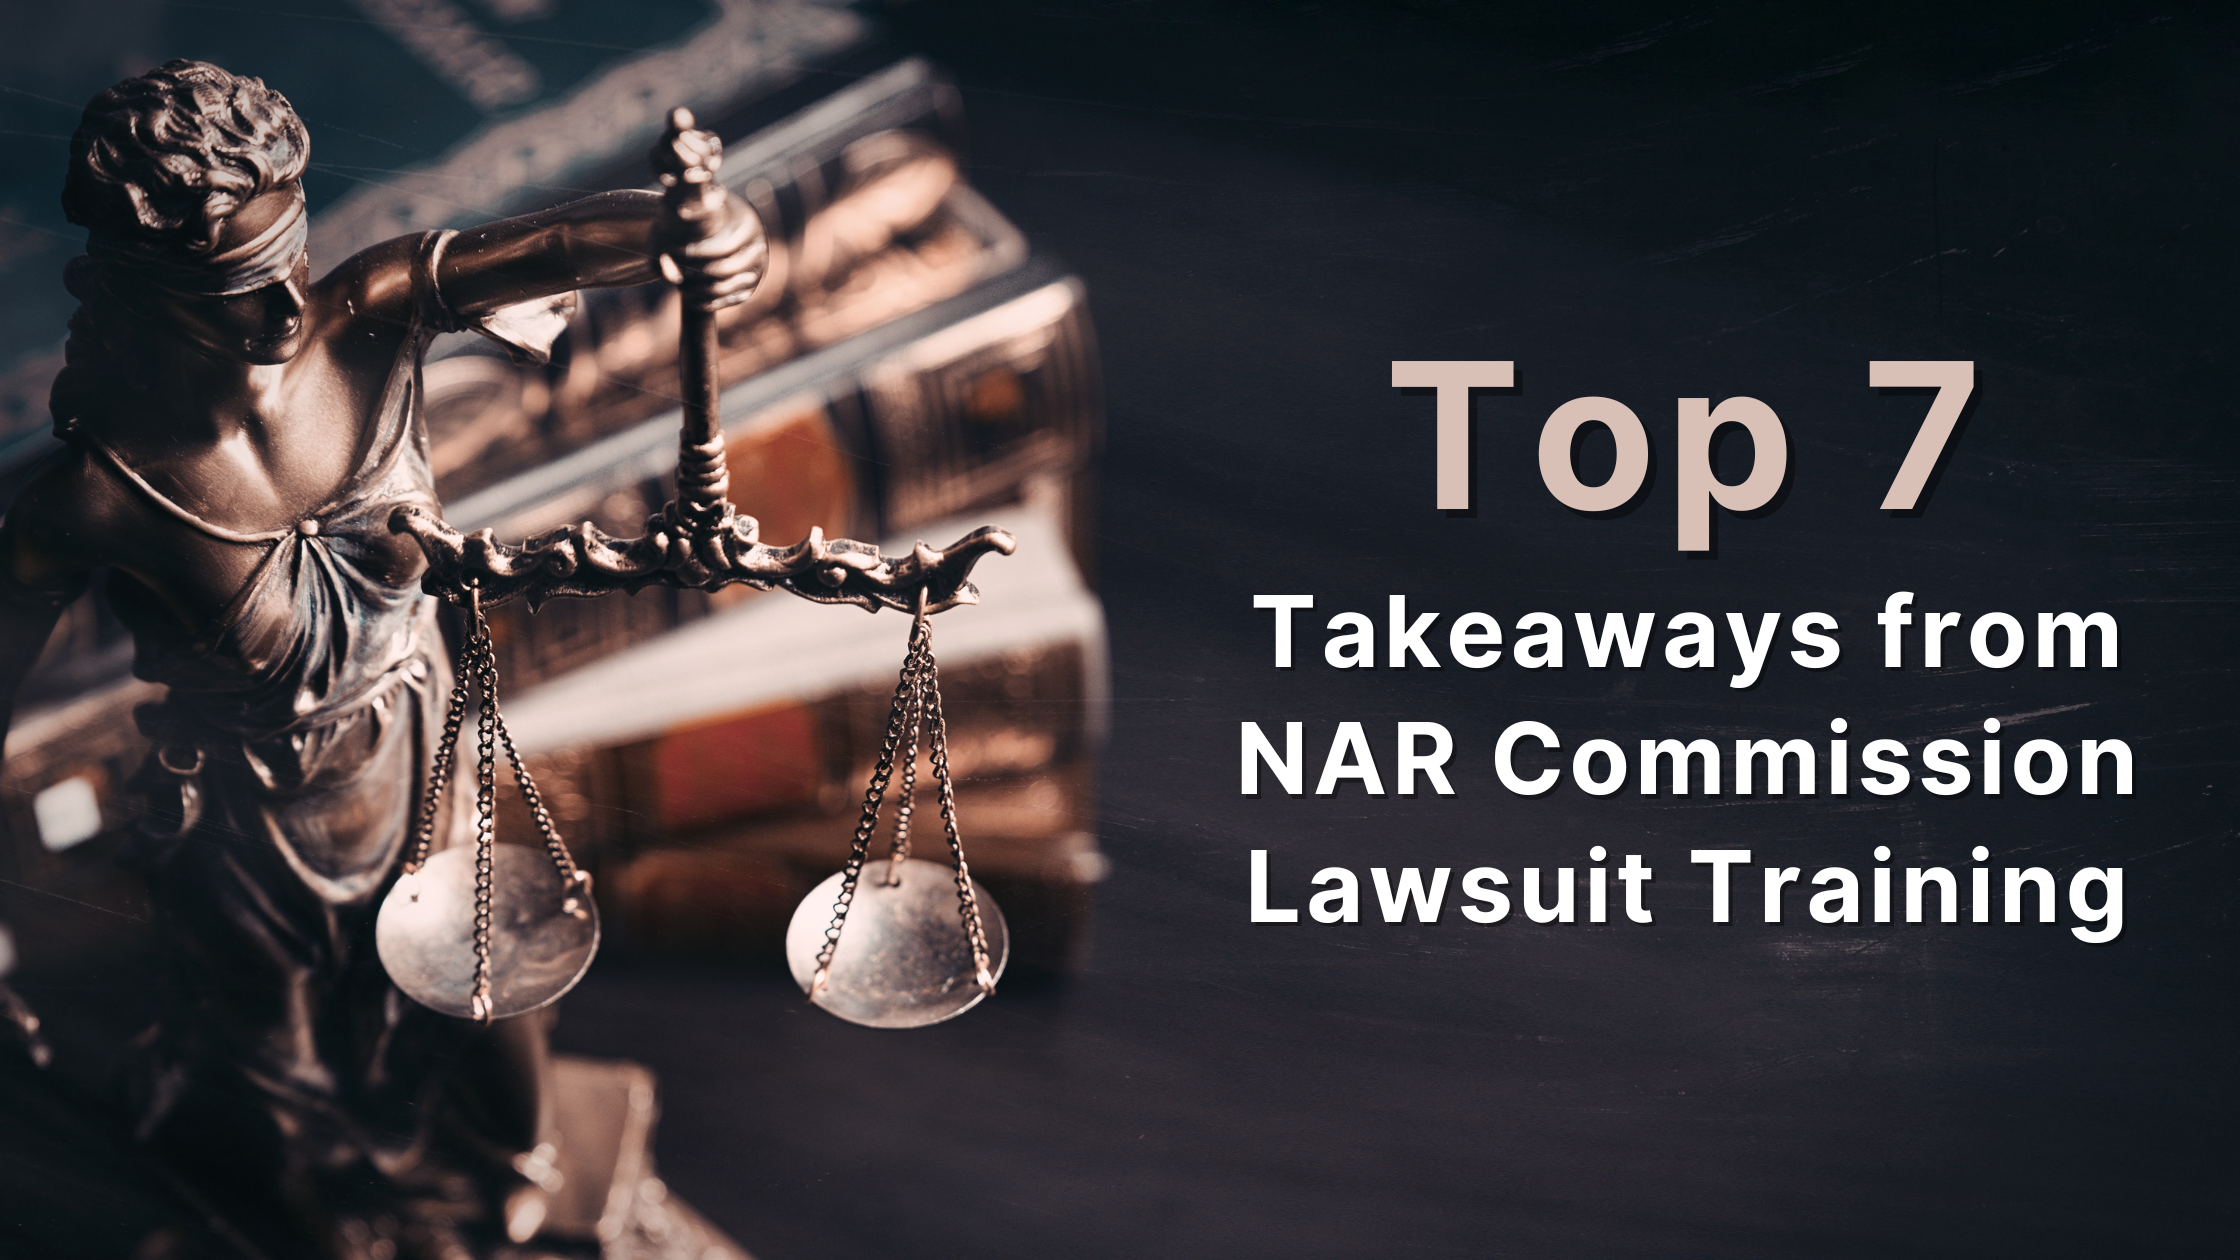 NAR Antitrust Commission Lawsuit Training and Tools